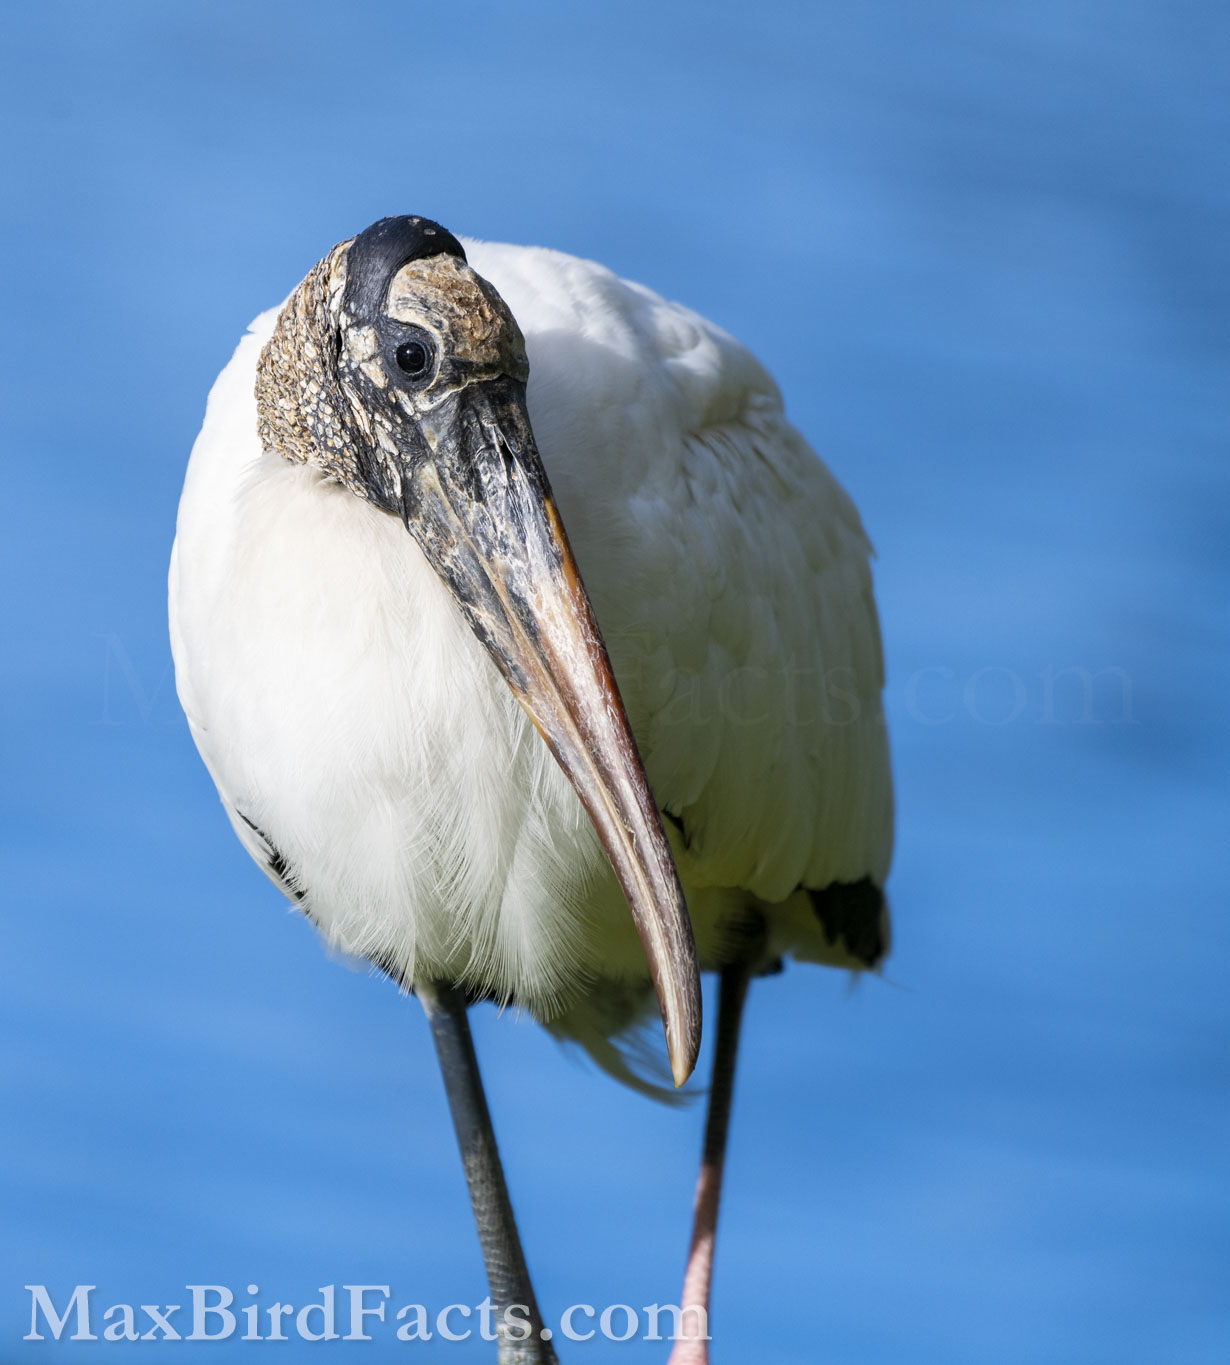 After the Wood Stork (Mycteria americana) stood up and entered the warm sunlight.